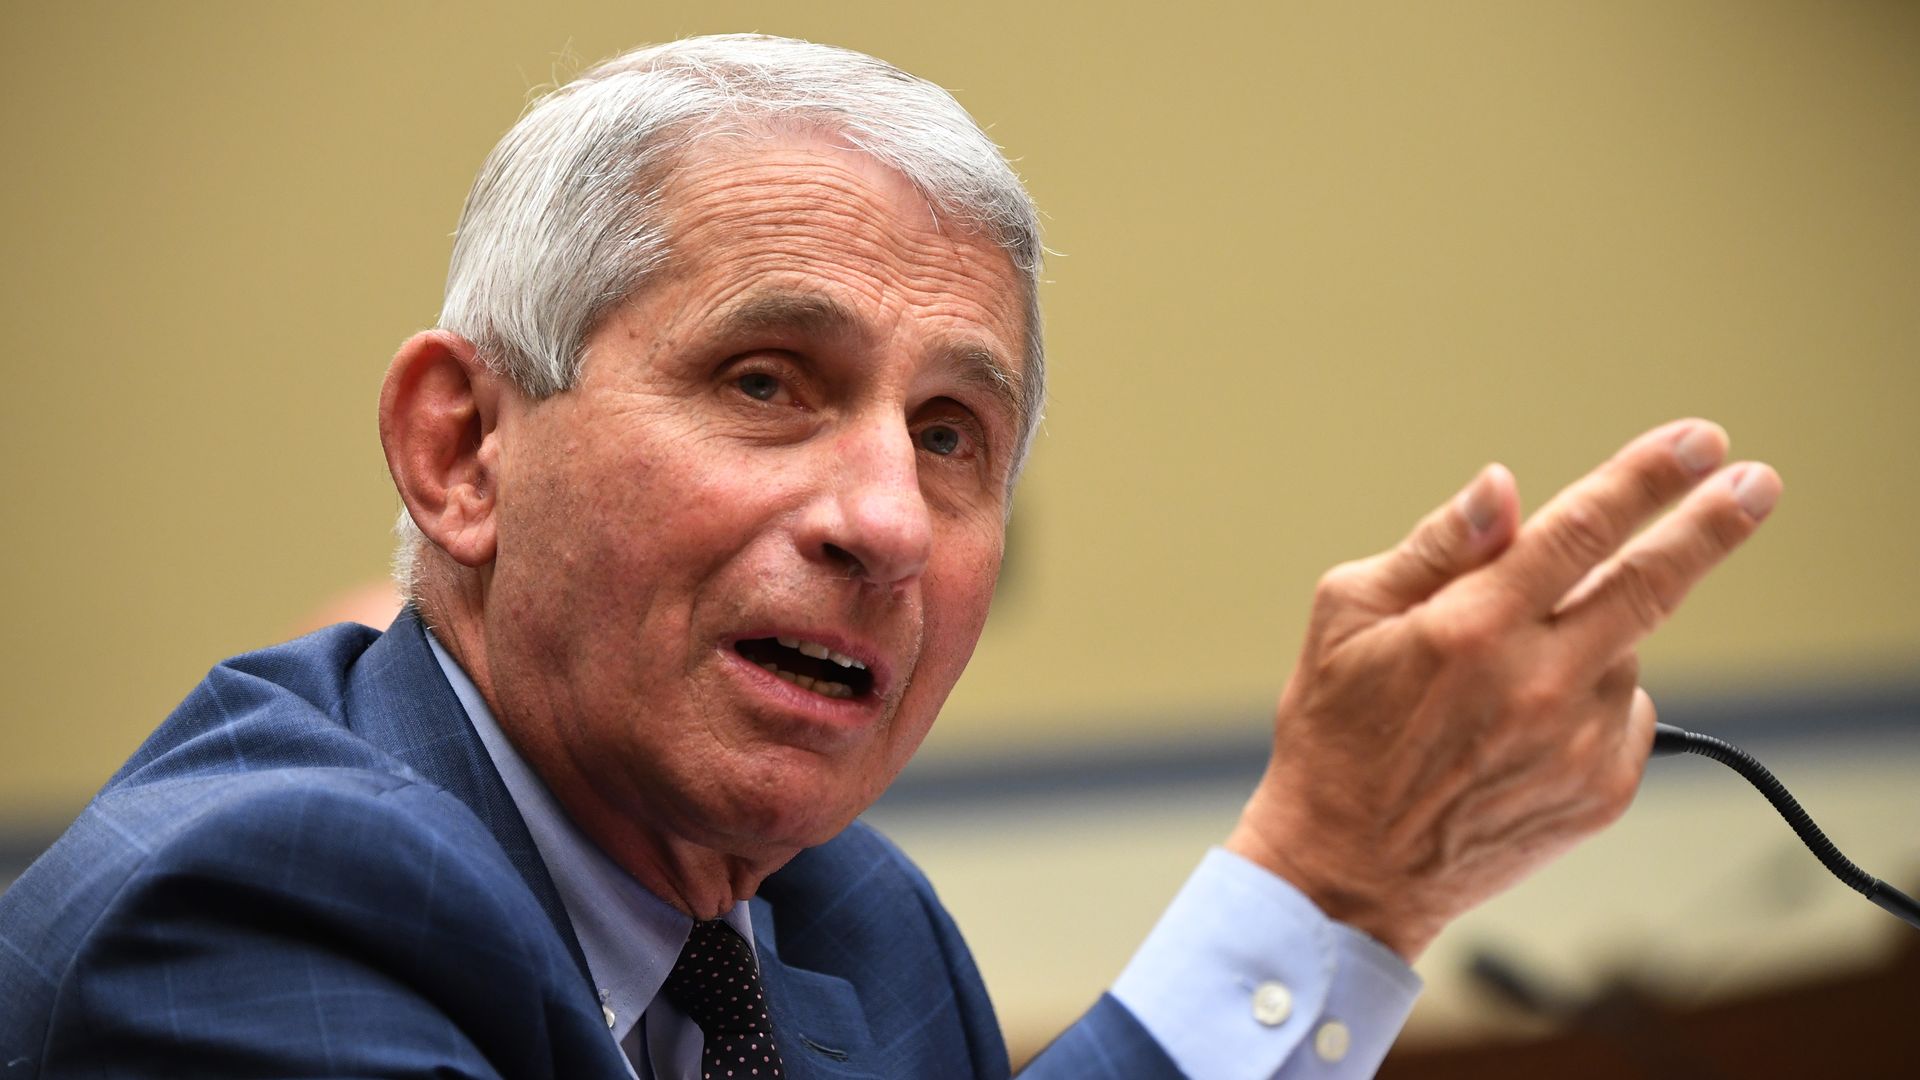 NIAID director Anthony Fauci testifies during a House Subcommittee on the Coronavirus Crisis hearing on a national plan to contain the COVID-19 pandemic, on Capitol Hill